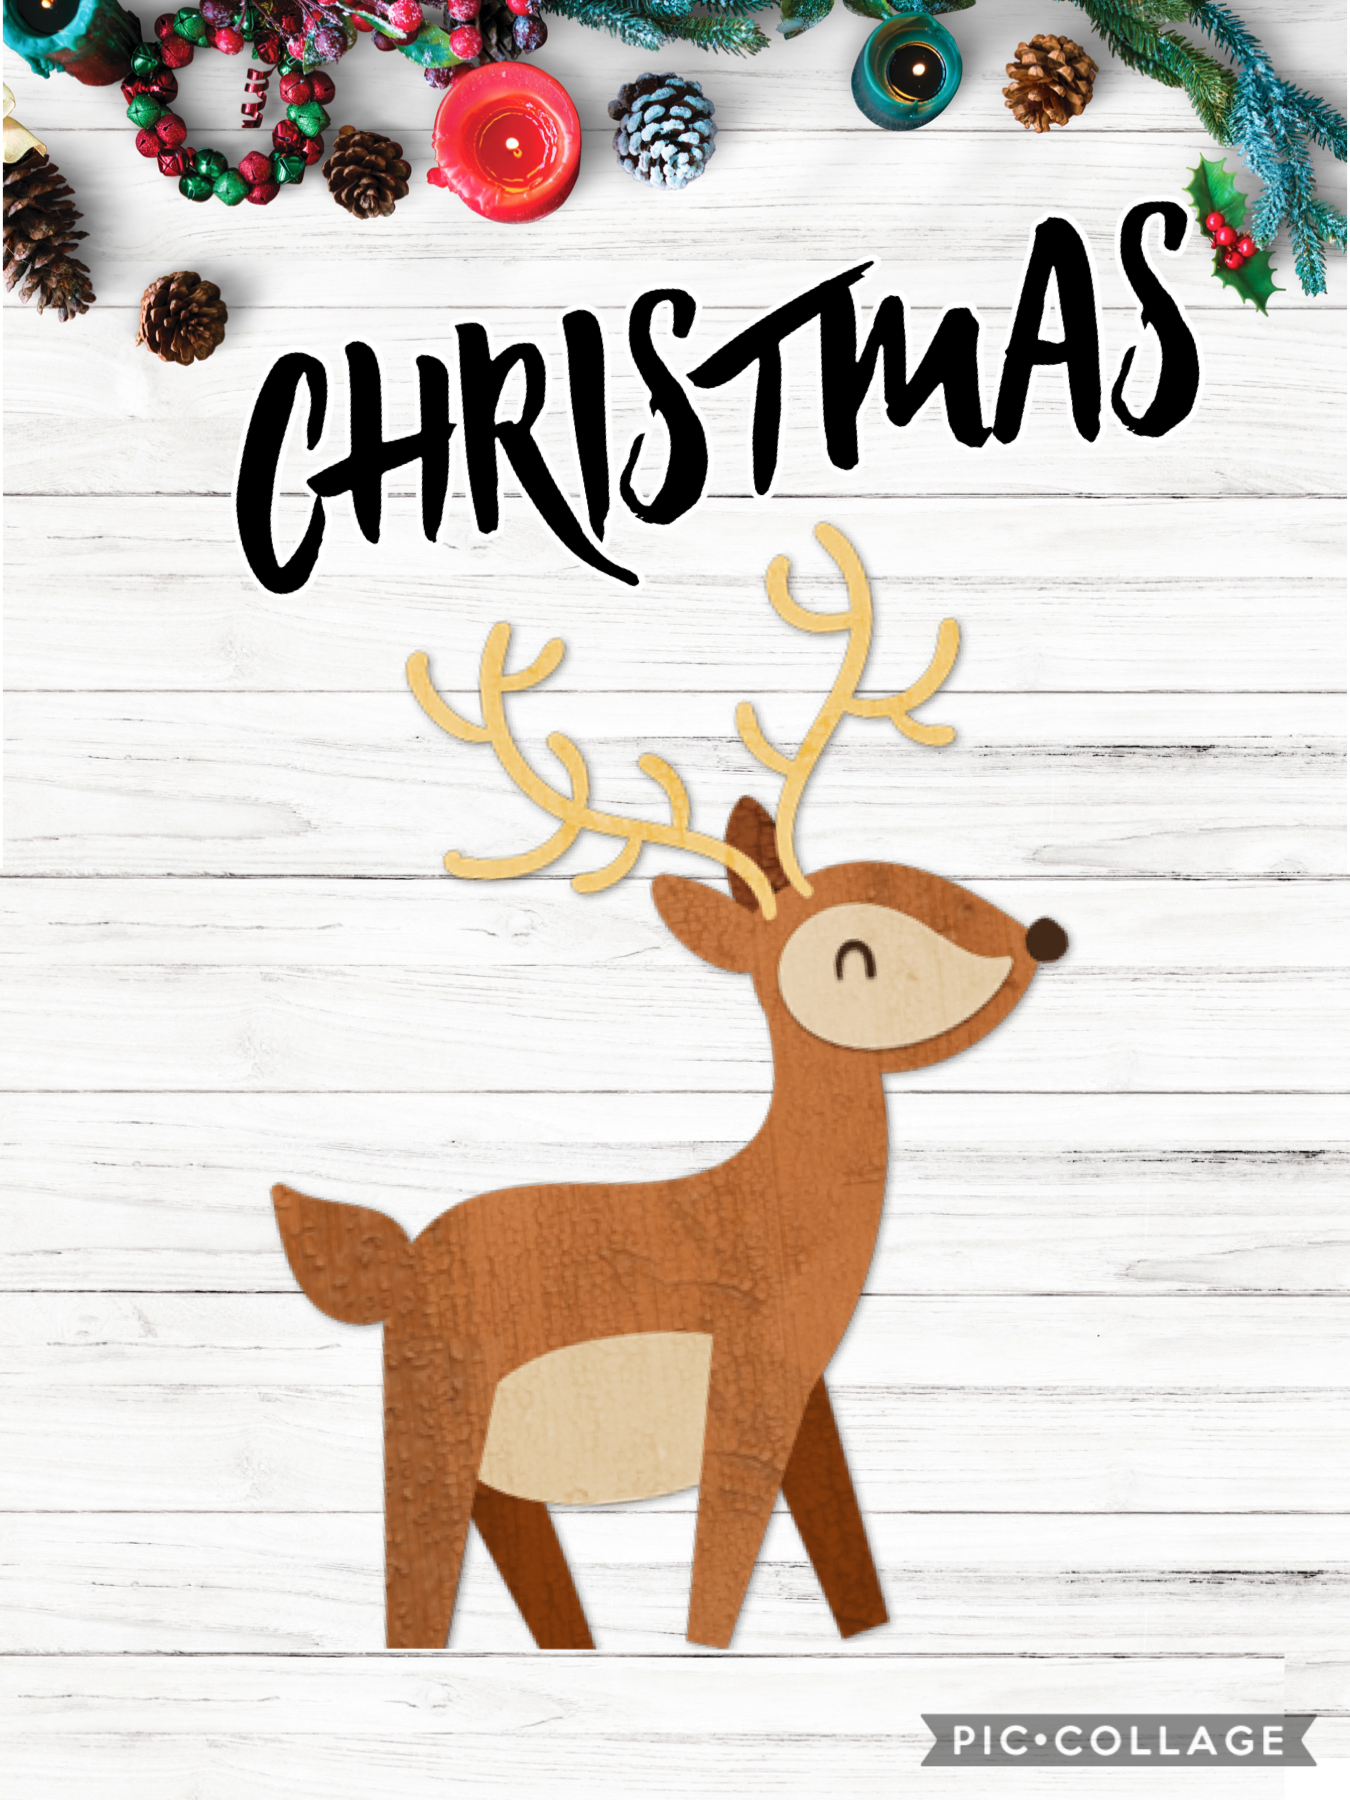 Christmas iPad vertical background 
Extremely simple